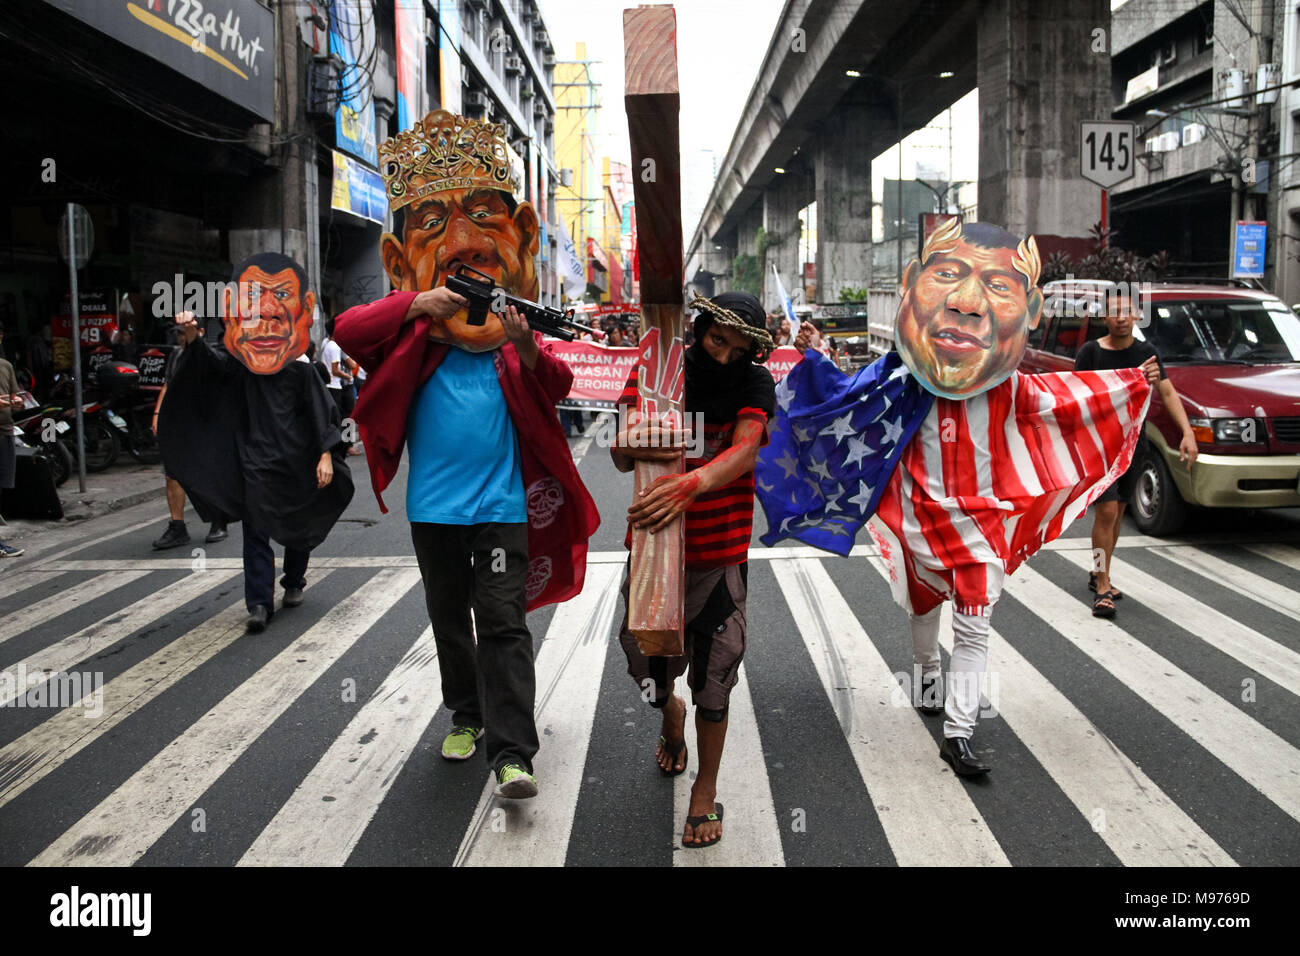 Manila, Philippines. 23rd March, 2018. A protester carries a cross while activists wearing several Duterte masks mock and hit him as they March towards Mendiola bridge in Manila. Activists slammed Duterte for the alleged double standard in his war on drugs, the crackdown on activists, and the recent designation of activists as terrorists according to the Malacanang. The March was held a few days before the Holy Week, with protesters carrying a cross to Mendiola, Manila. Credit: SOPA Images Limited/Alamy Live News Stock Photo